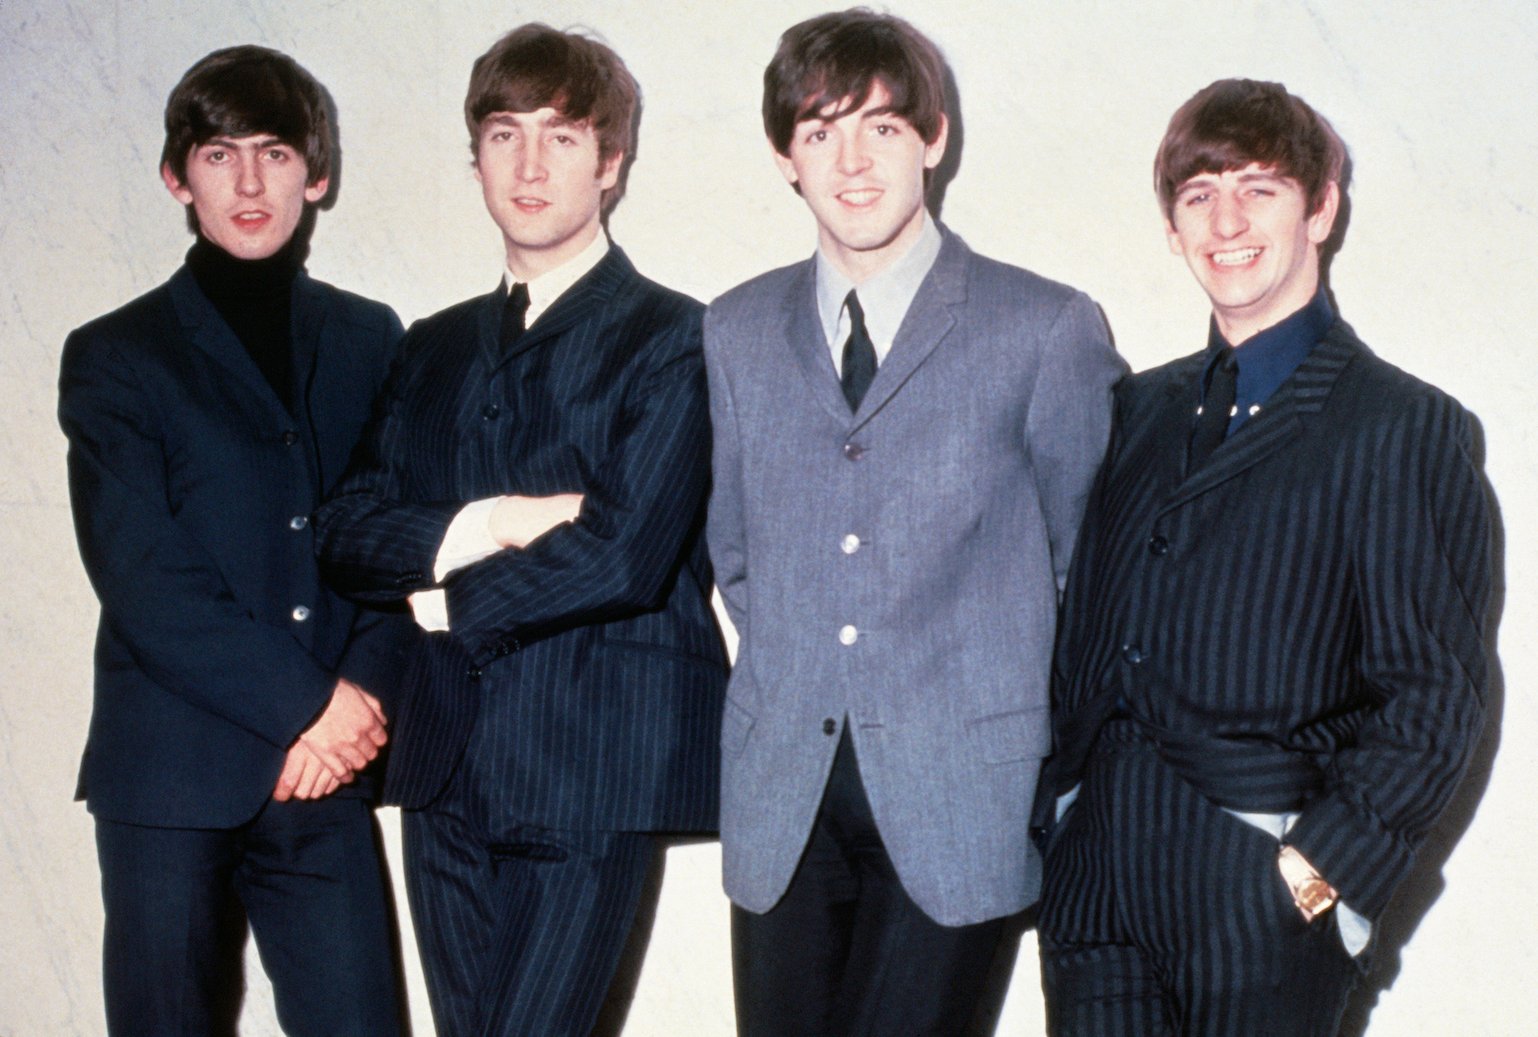 The Beatles pose together